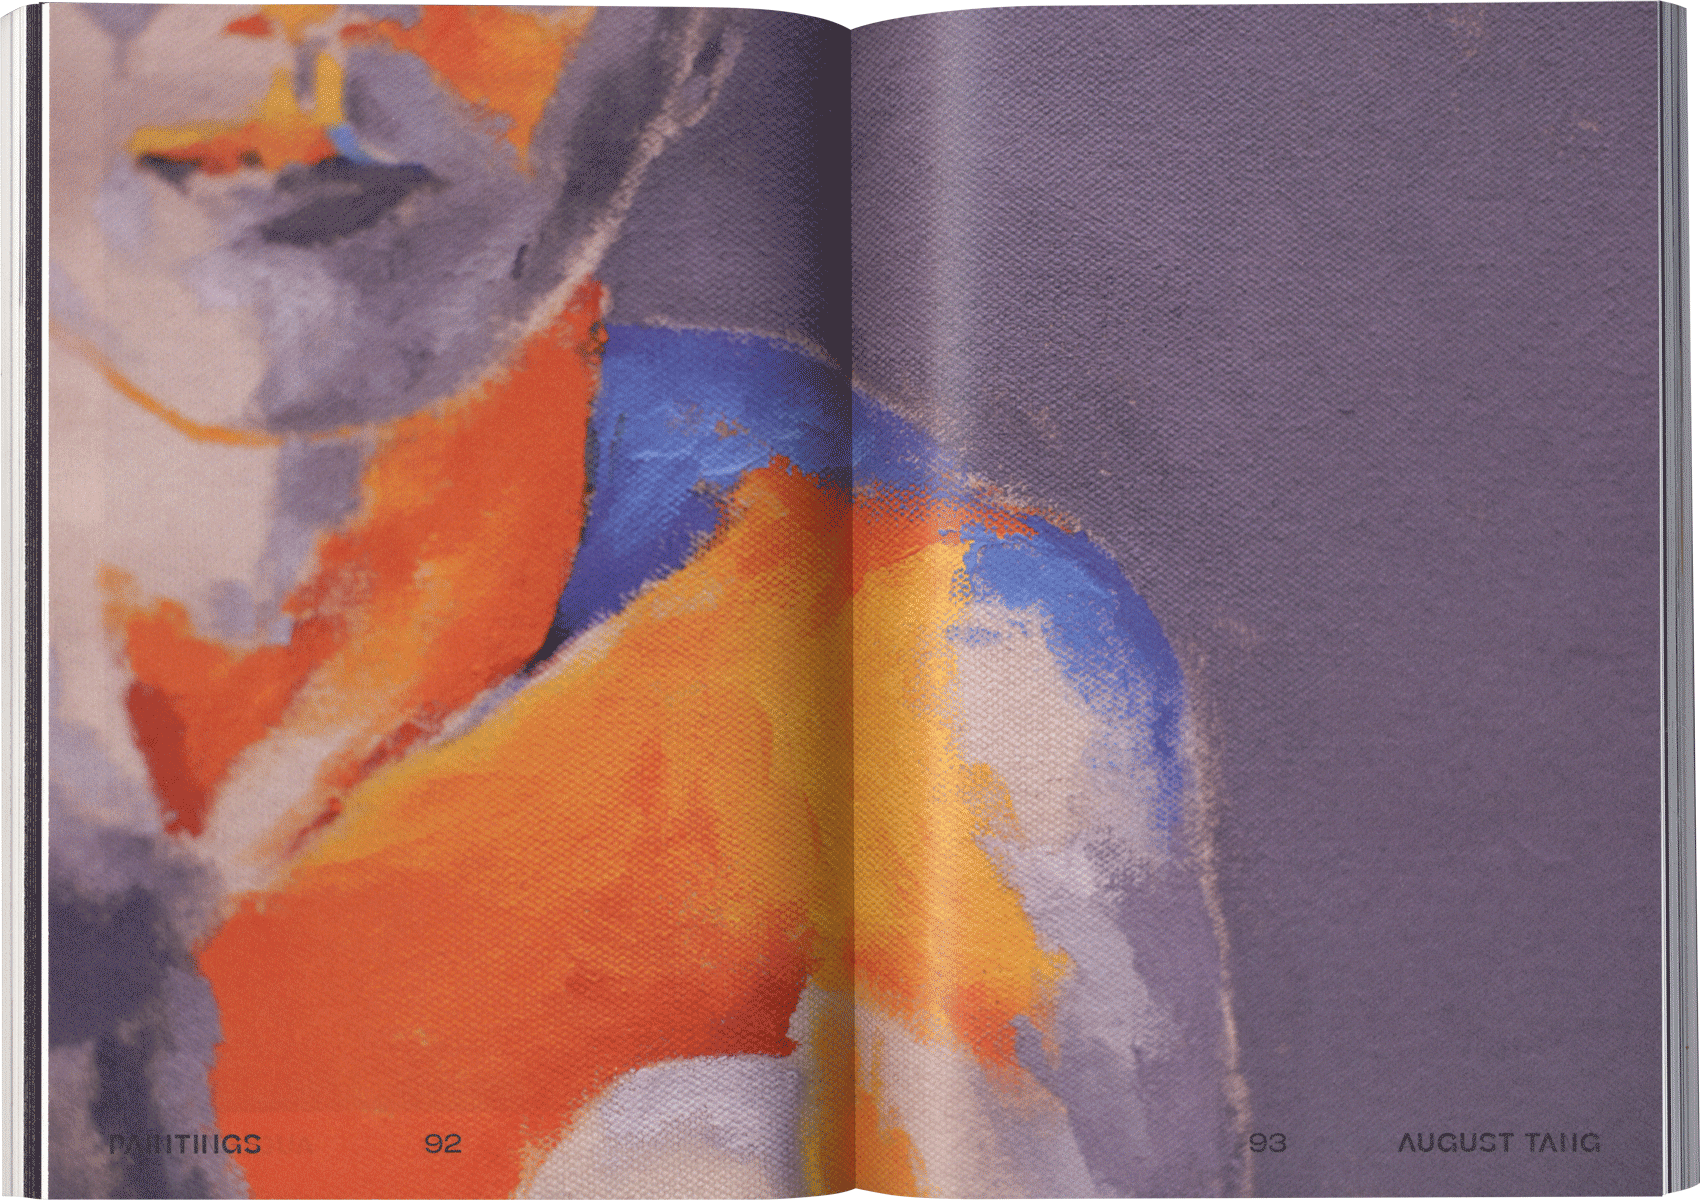 full bleed spread of a book with a close up image of a multicolored painting